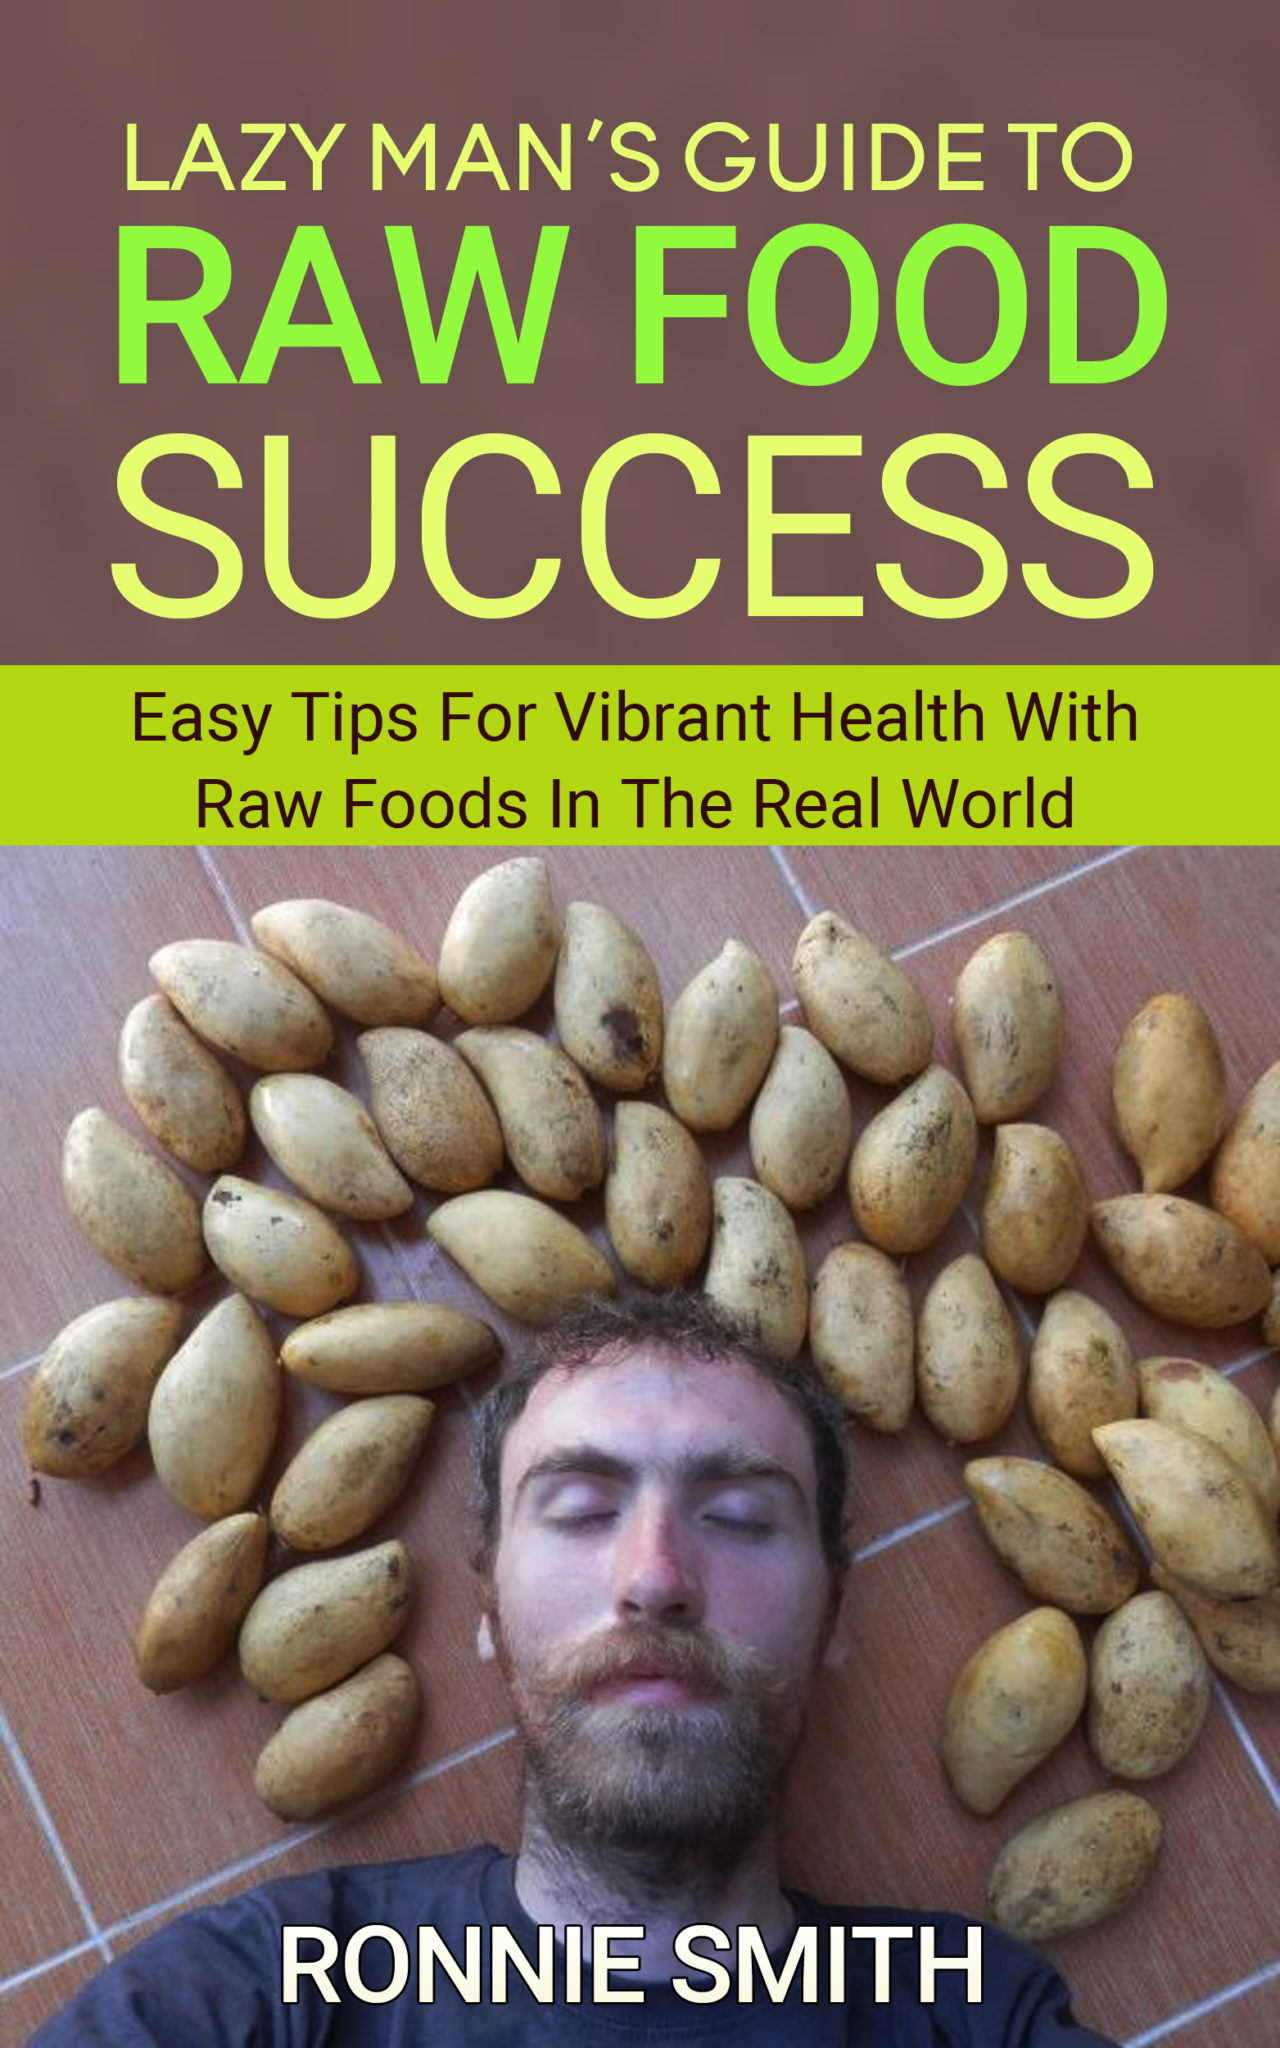 FREE: Lazy Man’s Guide To Raw Food Success by Ronnie Smith